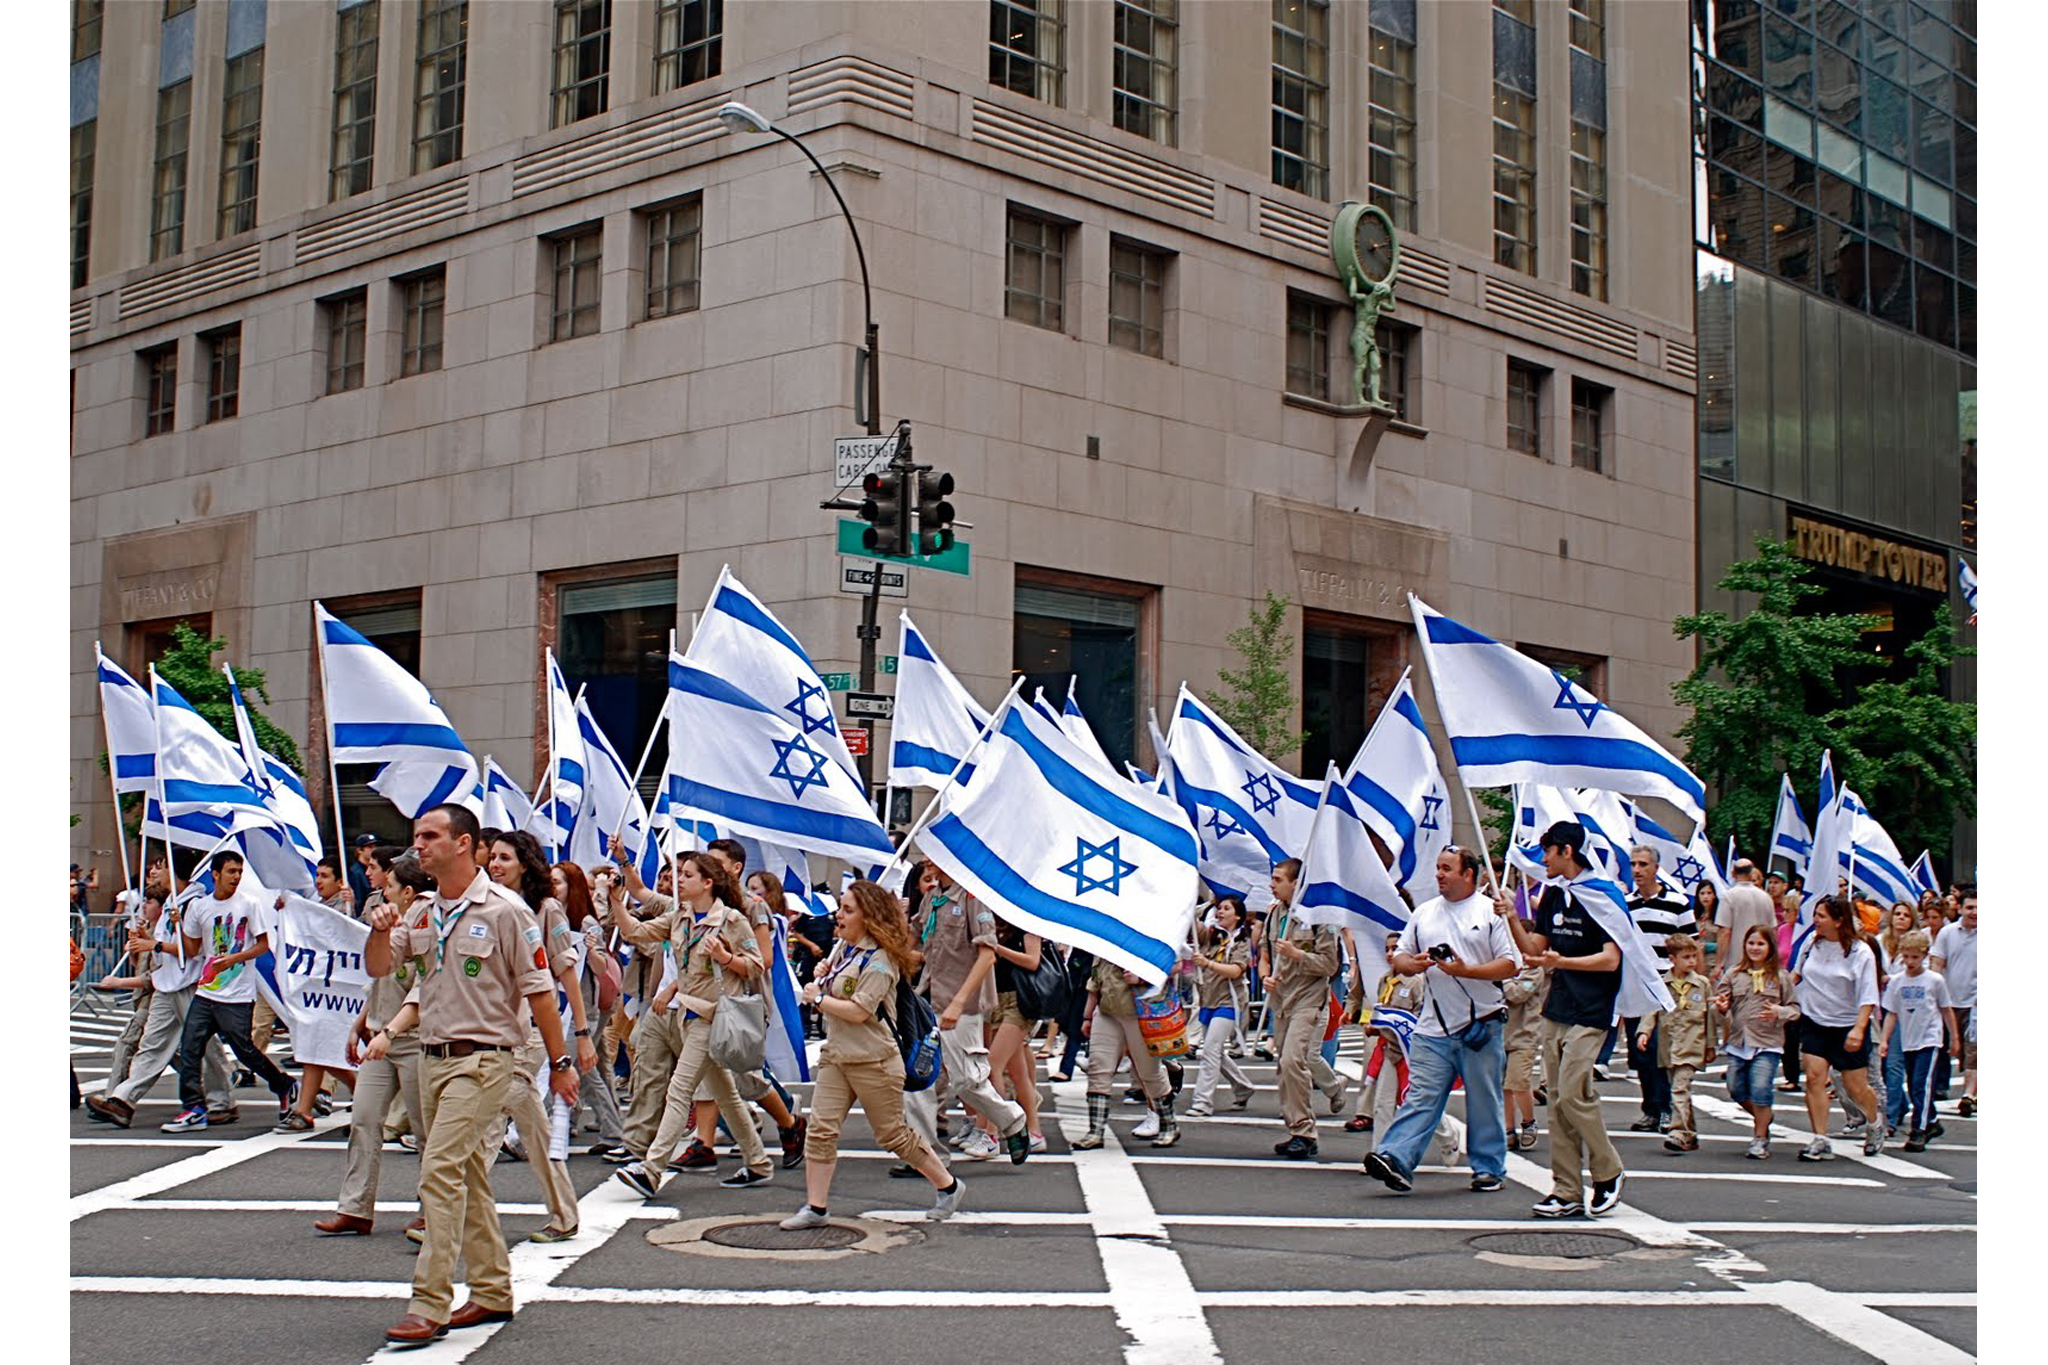 Celebrate Israel Parade Things to do in New York Kids